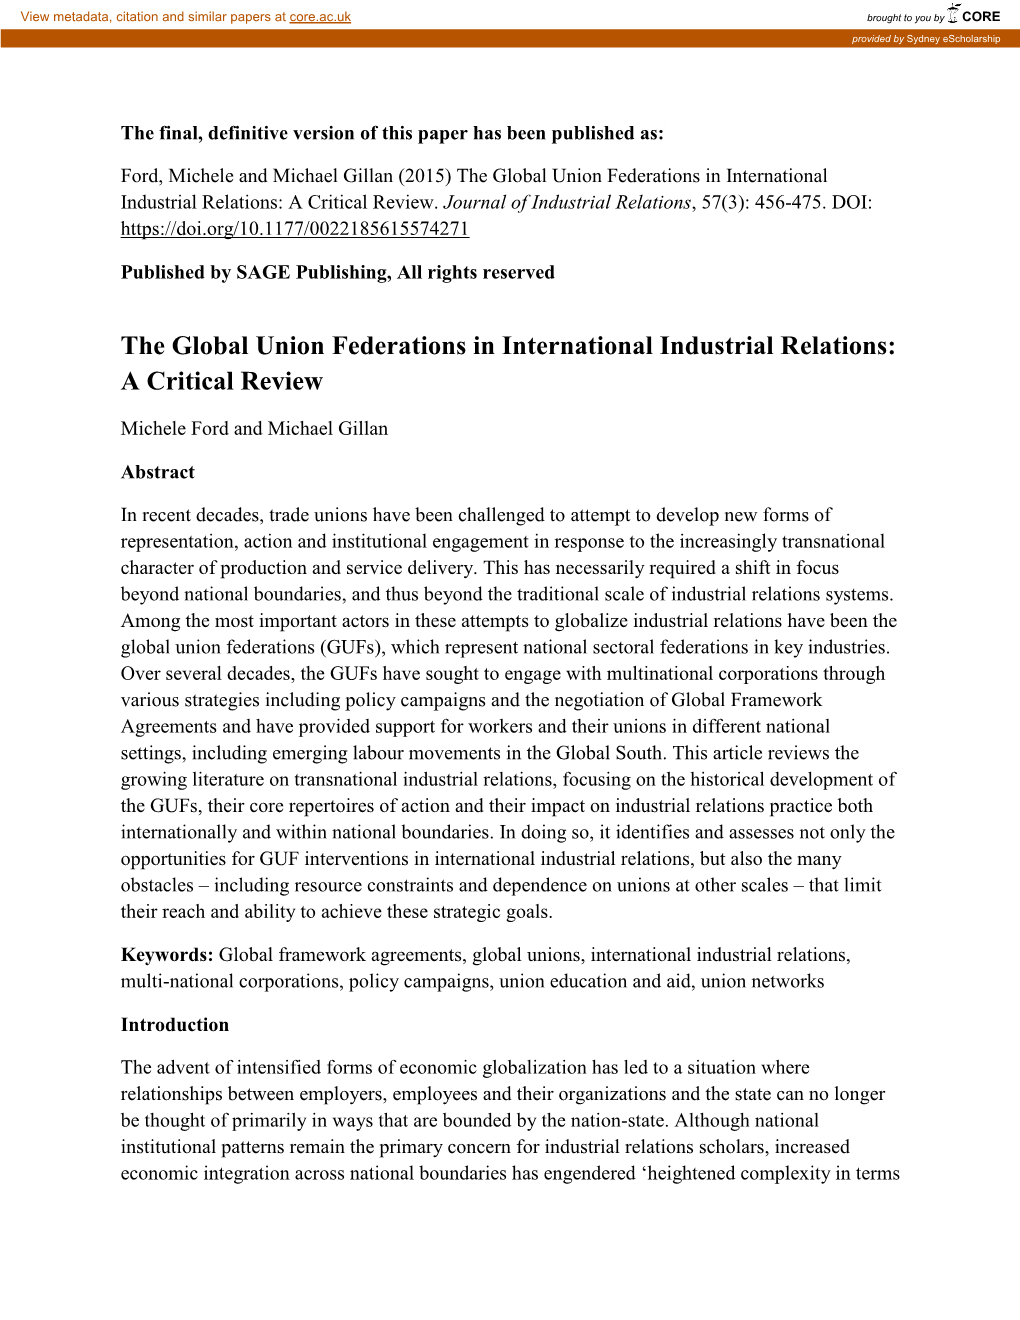 The Global Union Federations in International Industrial Relations: a Critical Review